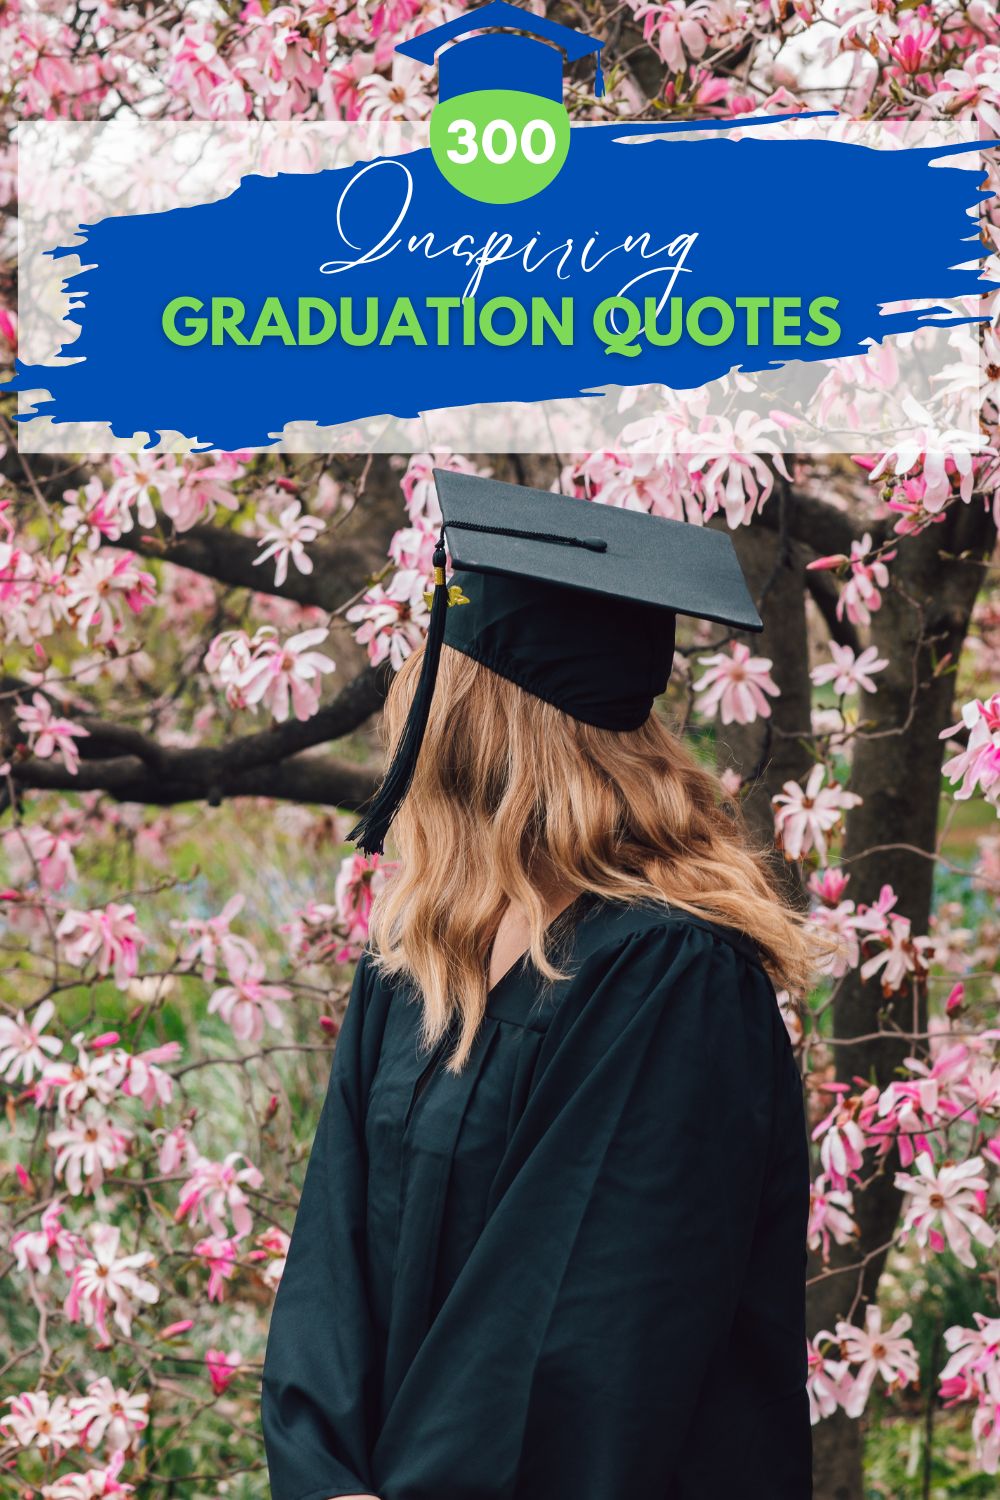 300 Best Graduation Quotes and Sayings Guaranteed to Inspire